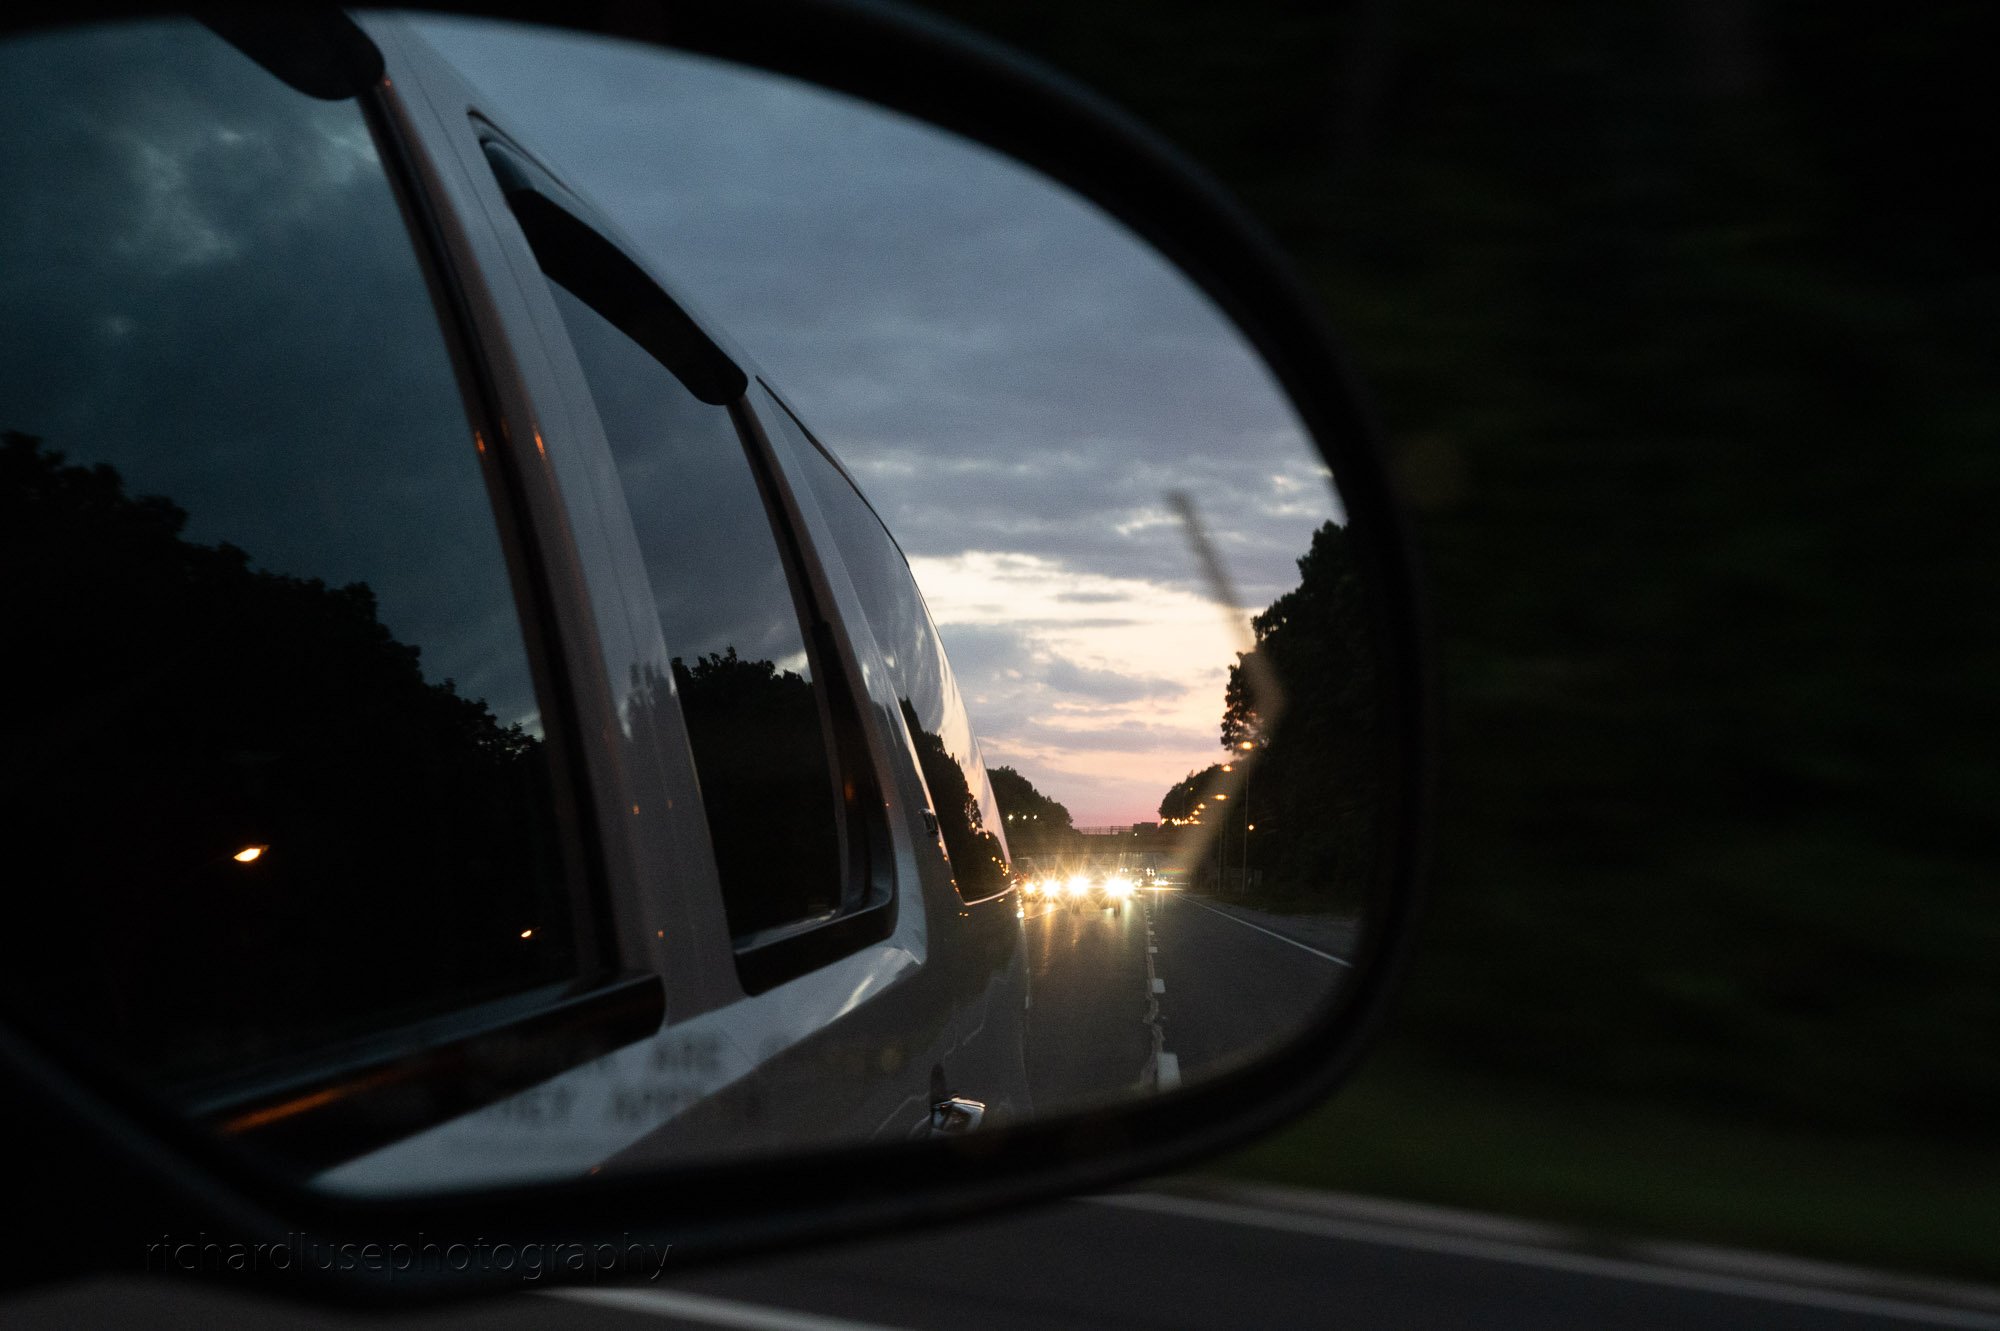 Sunrise in the rear view mirror - heading west.